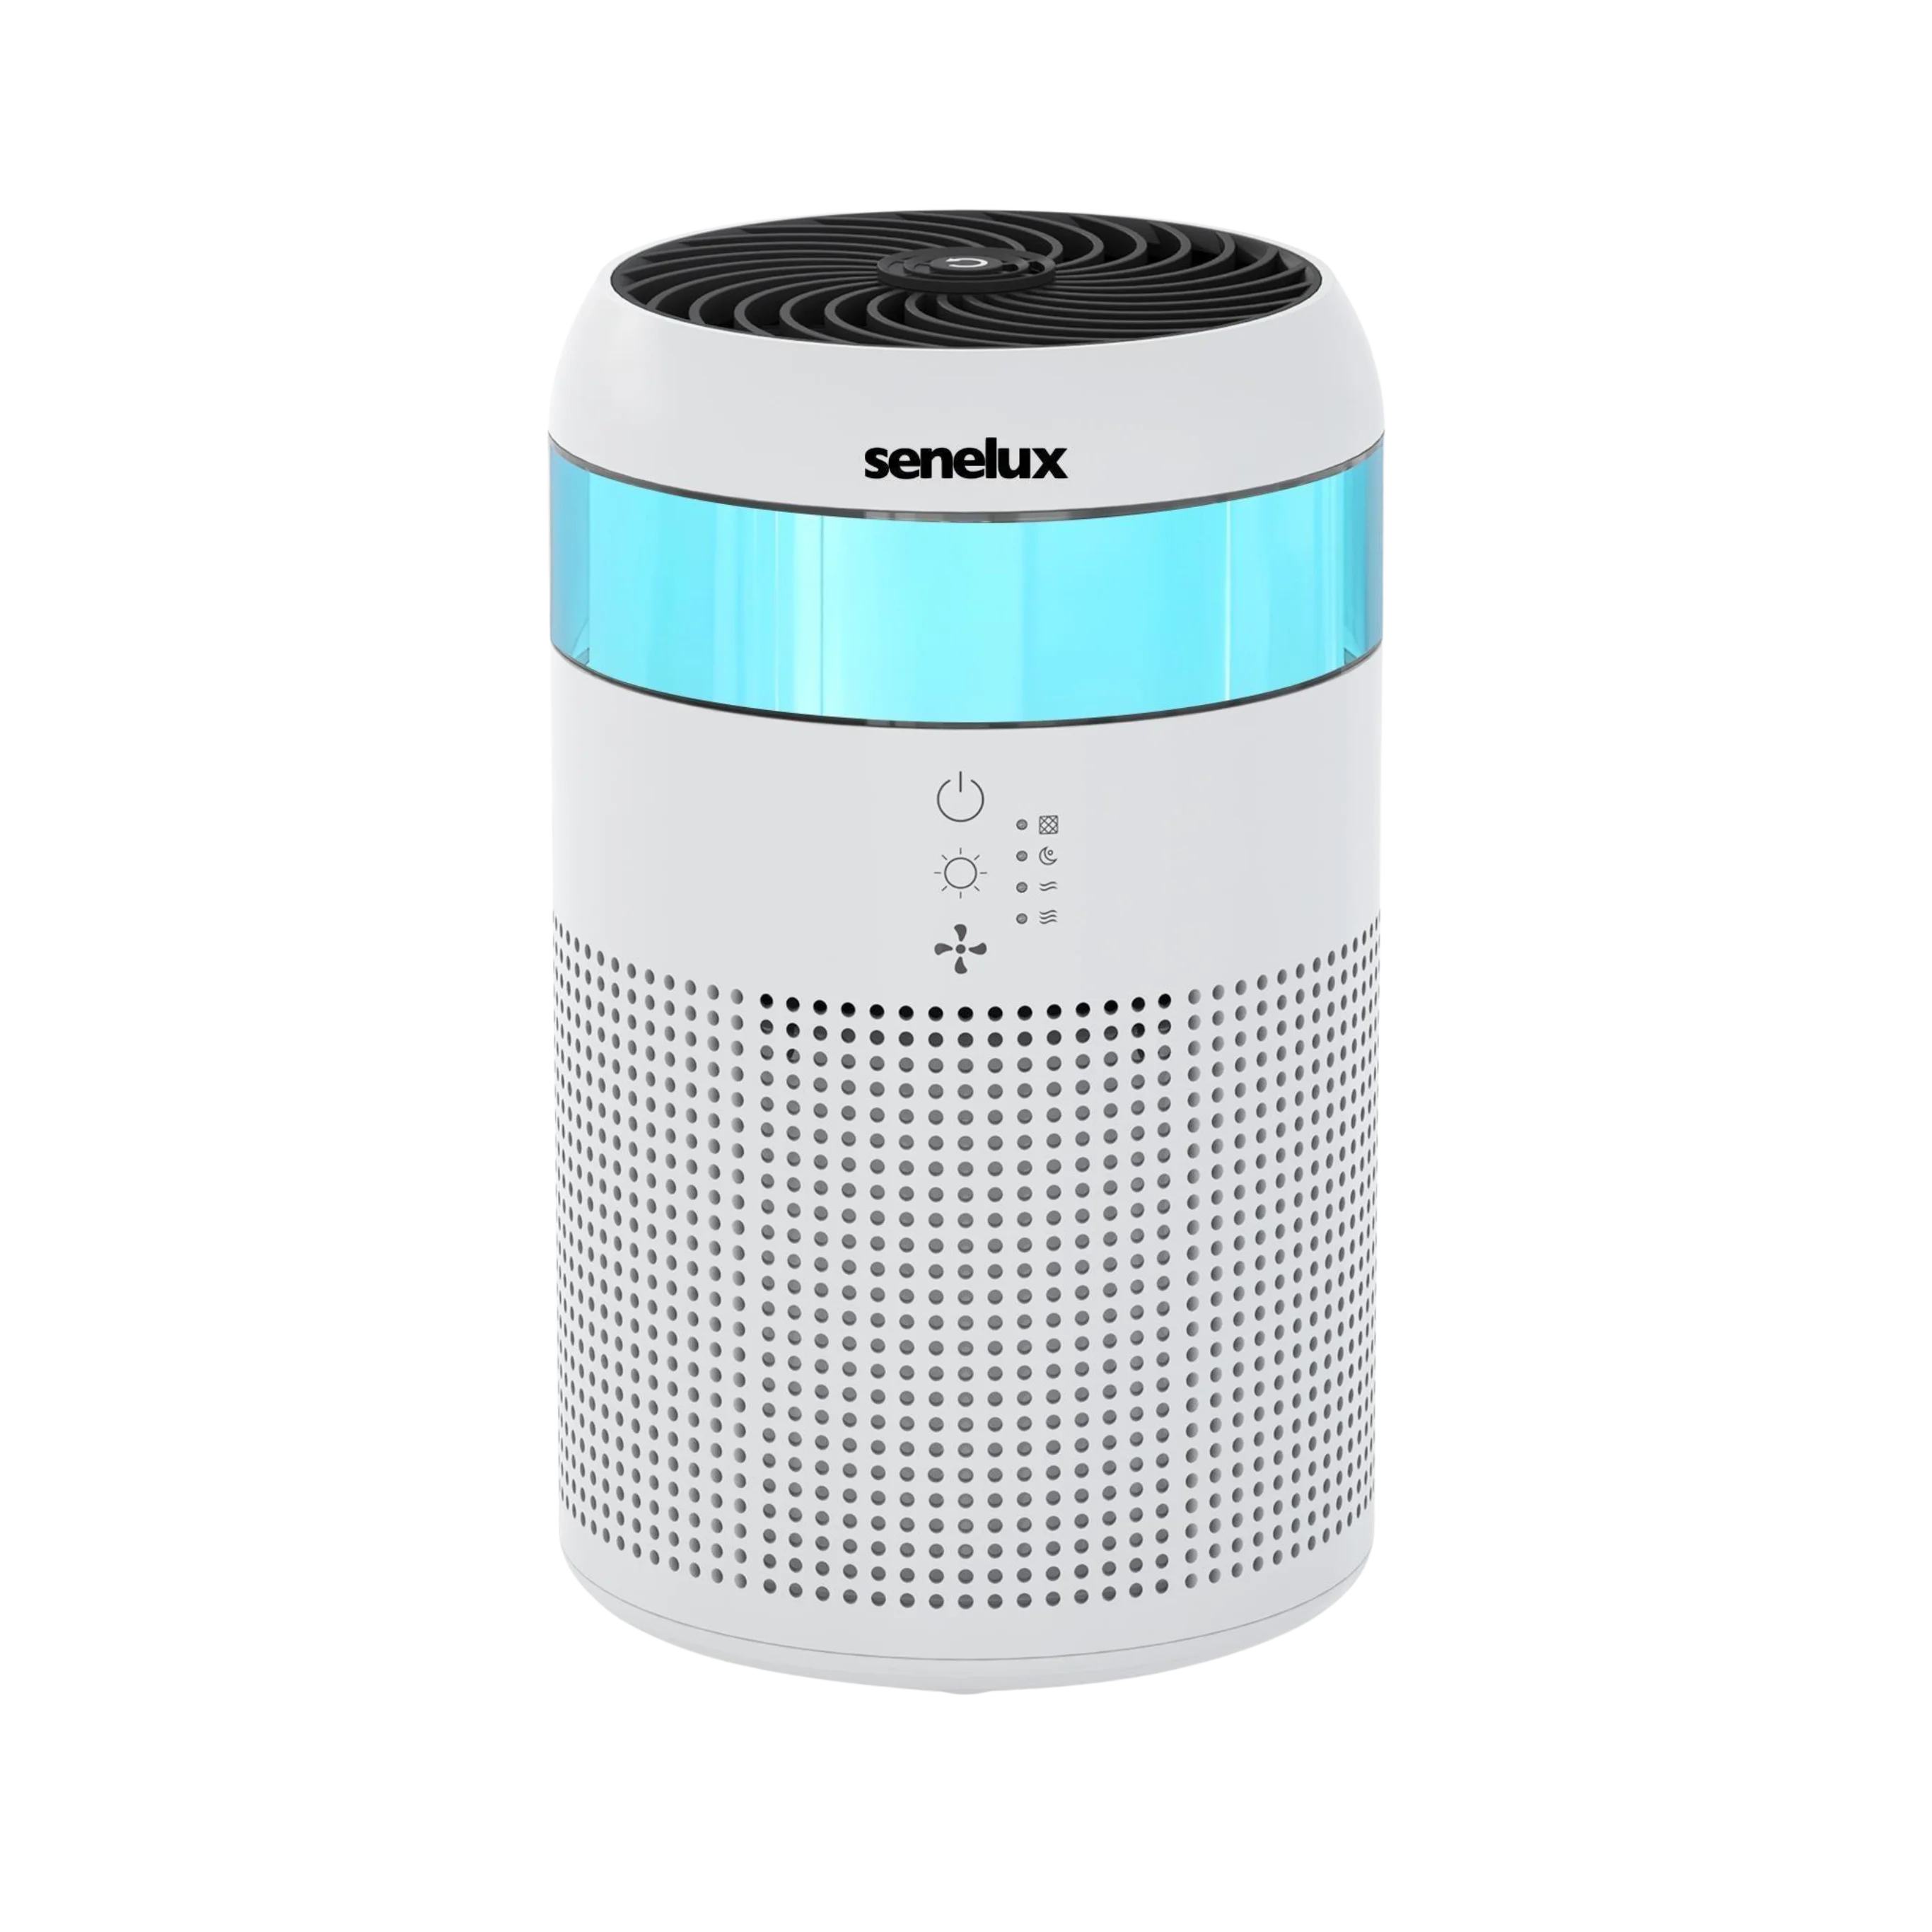 An image of the Senelux Demi Air Purifier with a blue LED light showing on the light strip and Senelux logo above